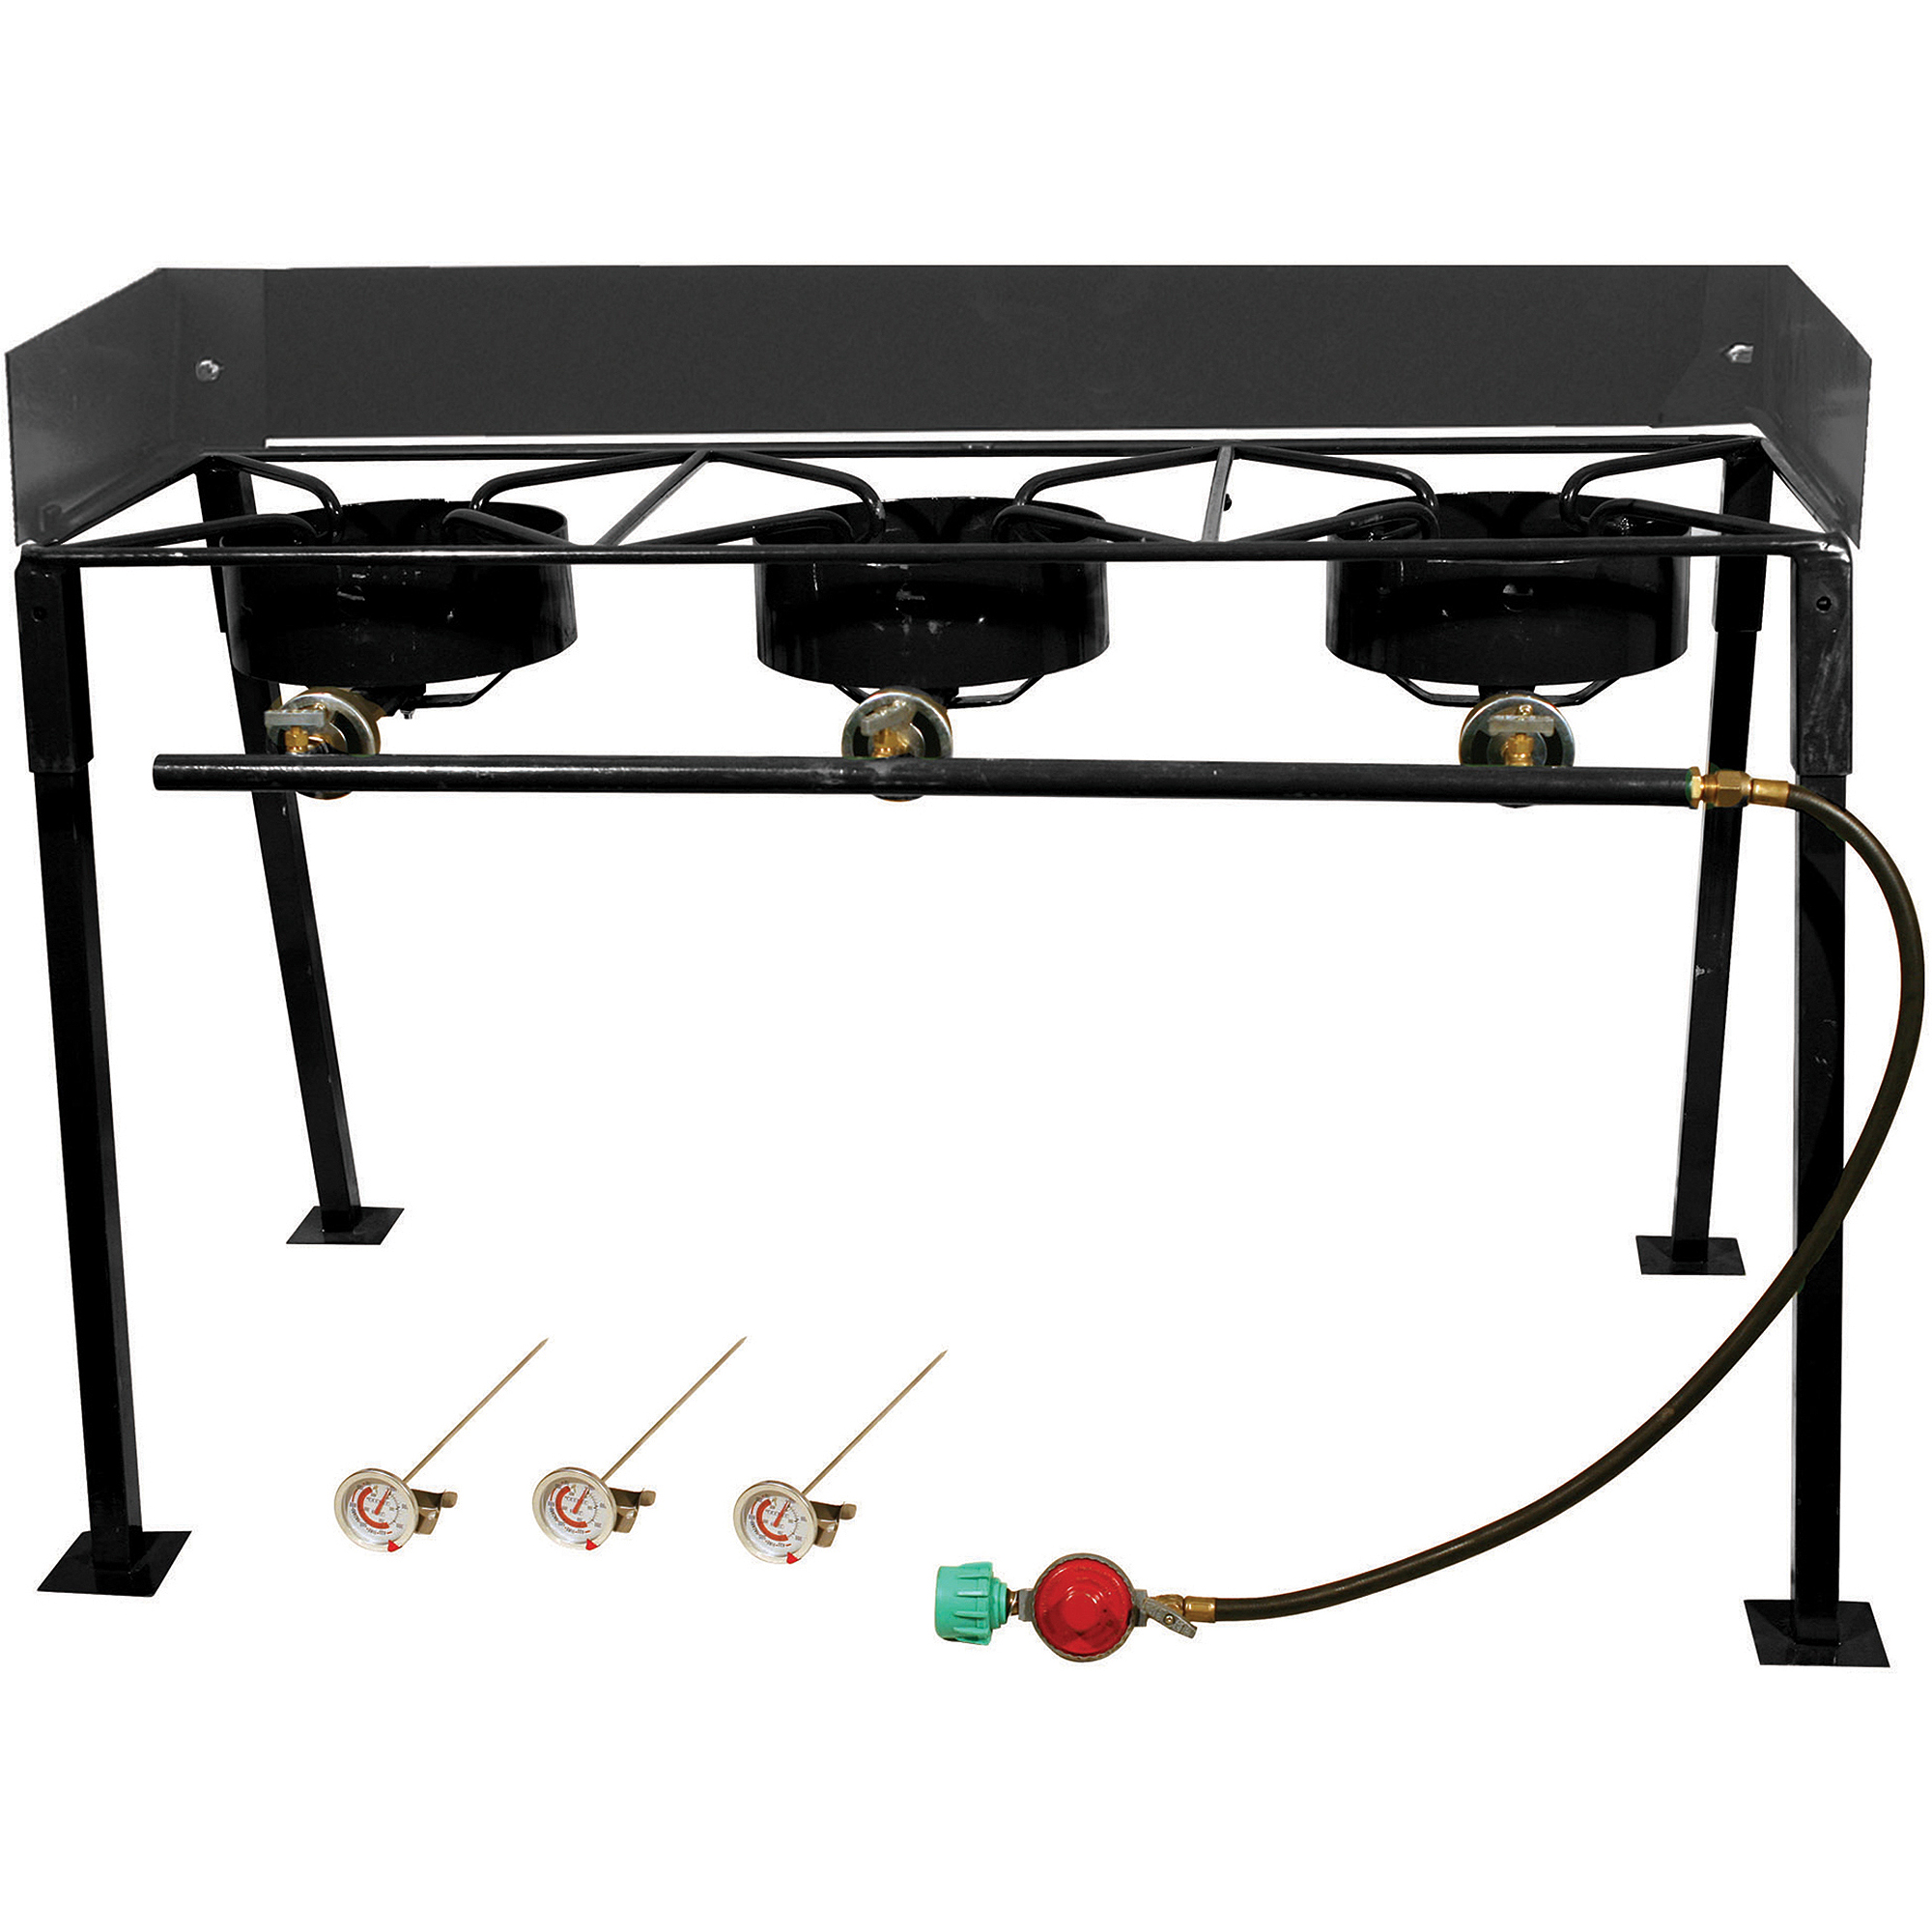 King Kooker #CS42 - Portable 3-Burner Outdoor Camp Stove with Detachable Legs - image 1 of 4